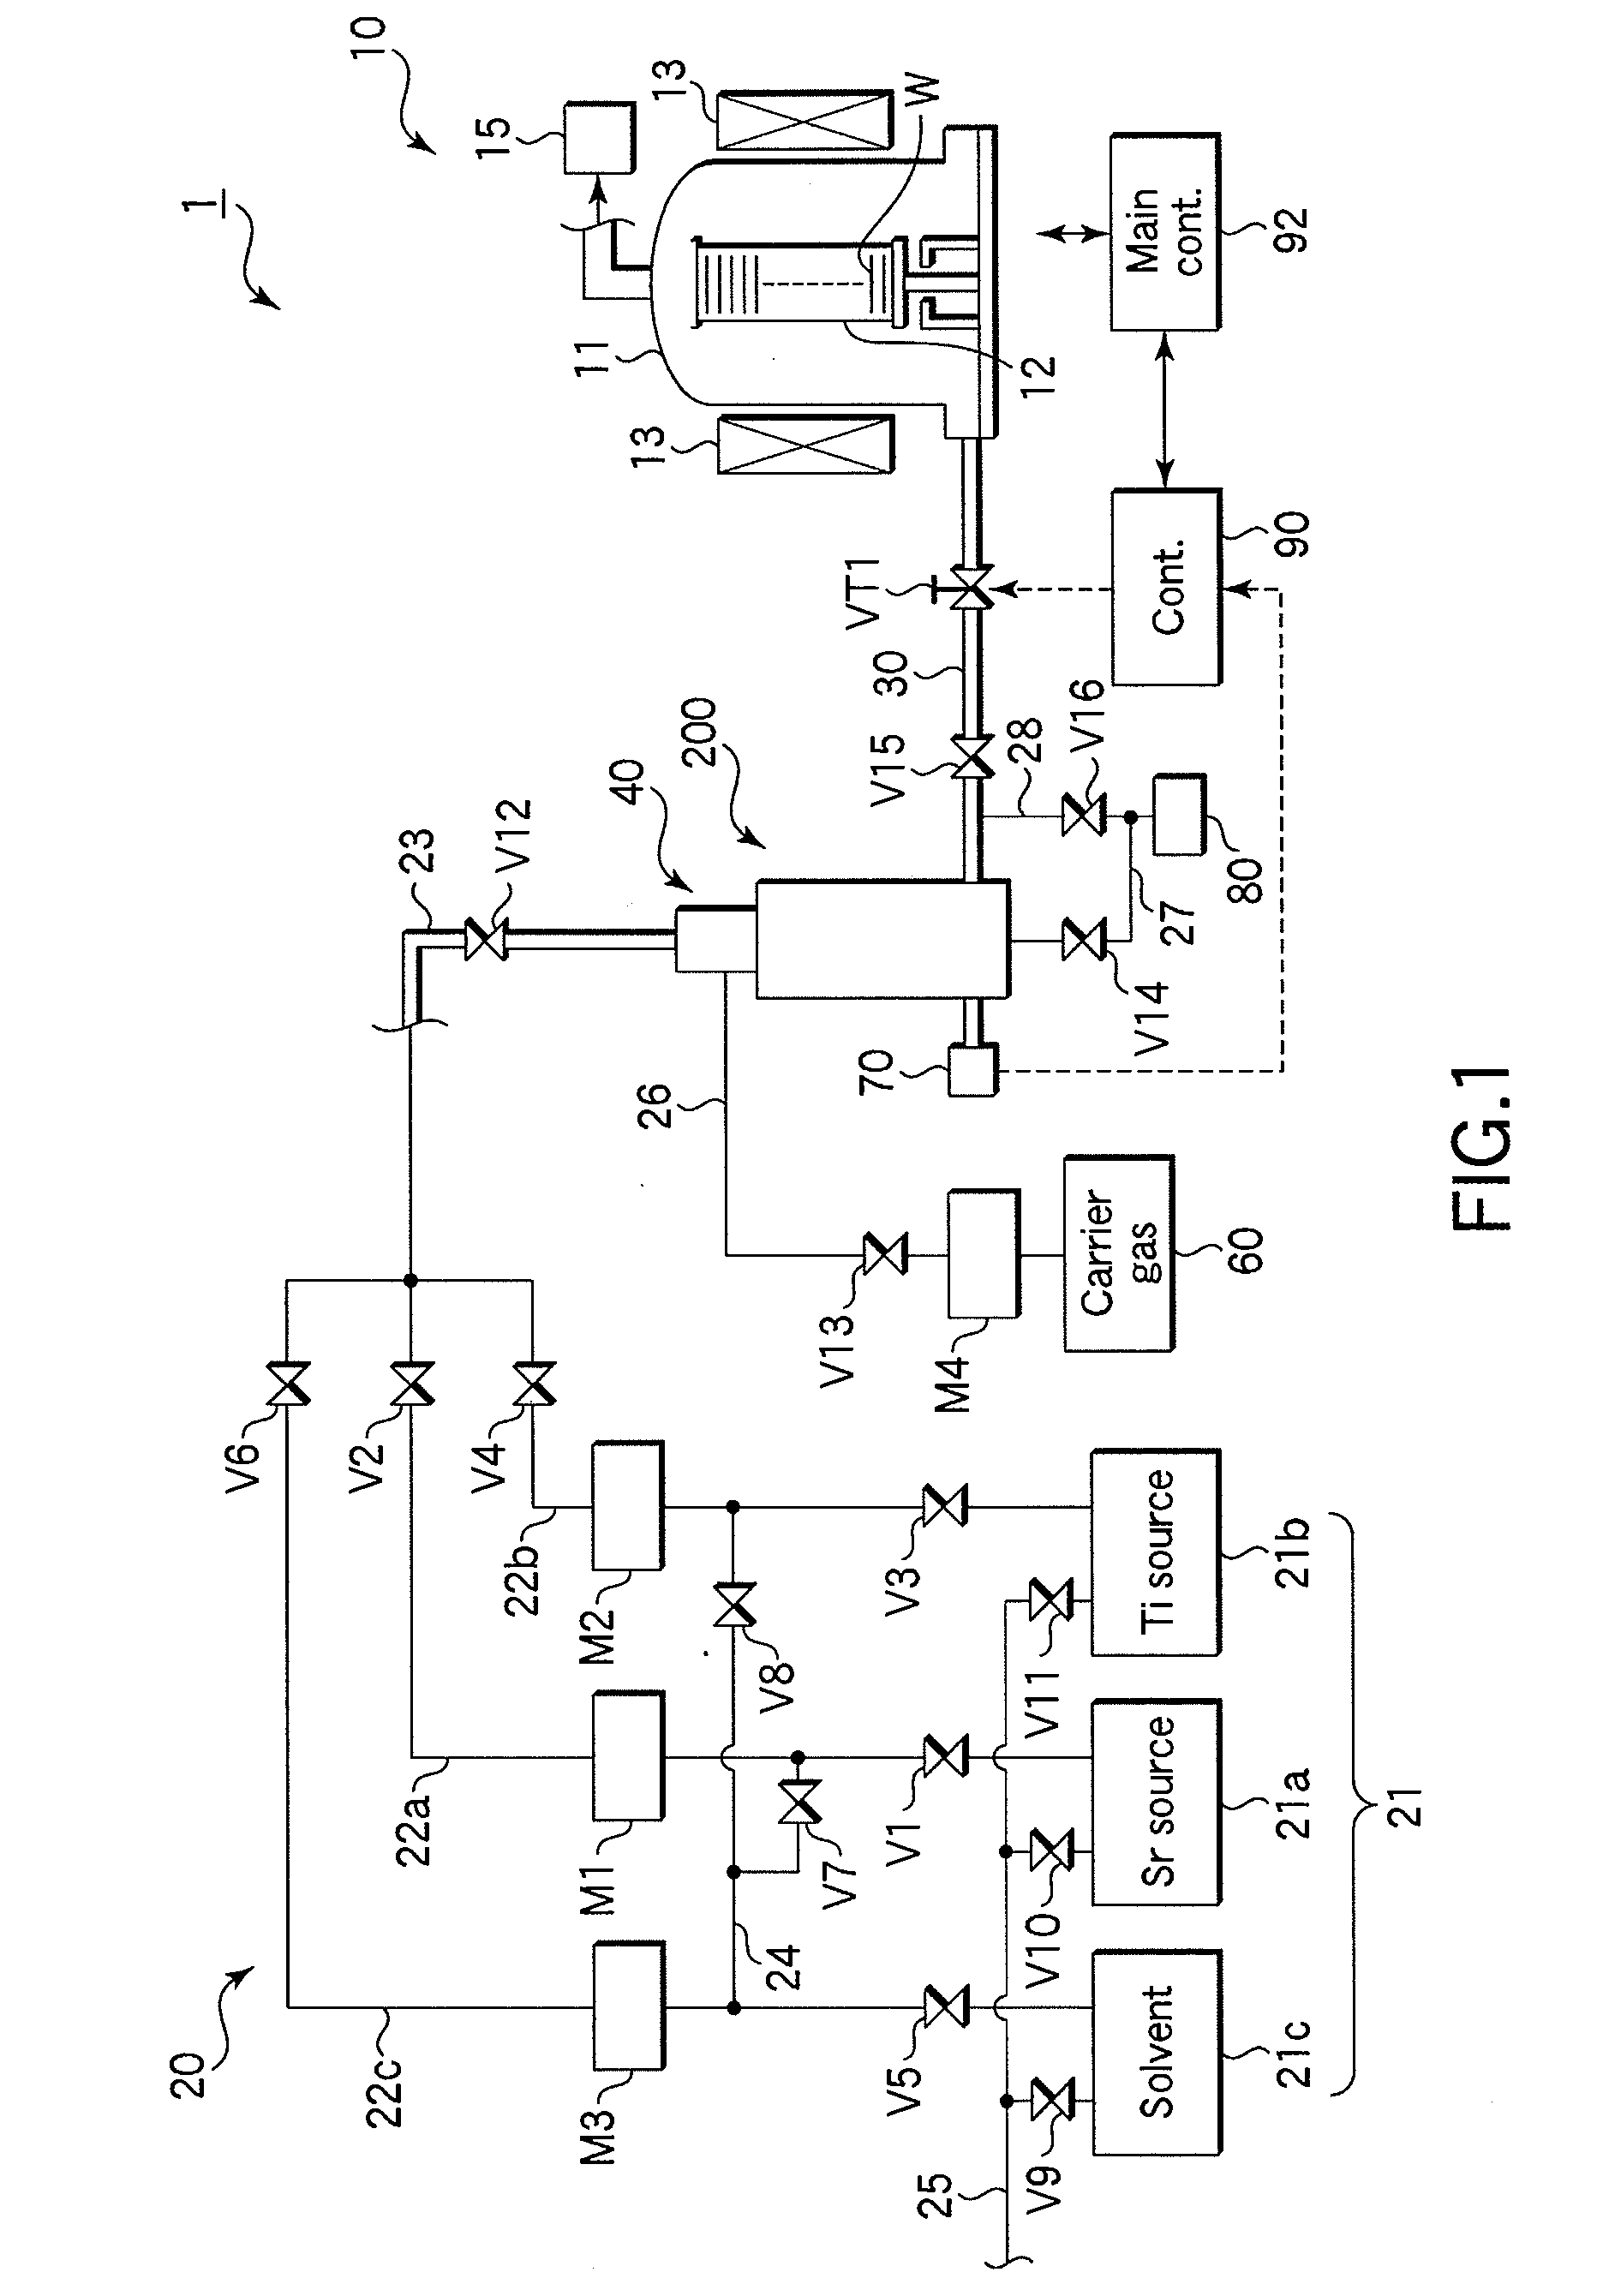 Semiconductor processing system including vaporizer and method for using same